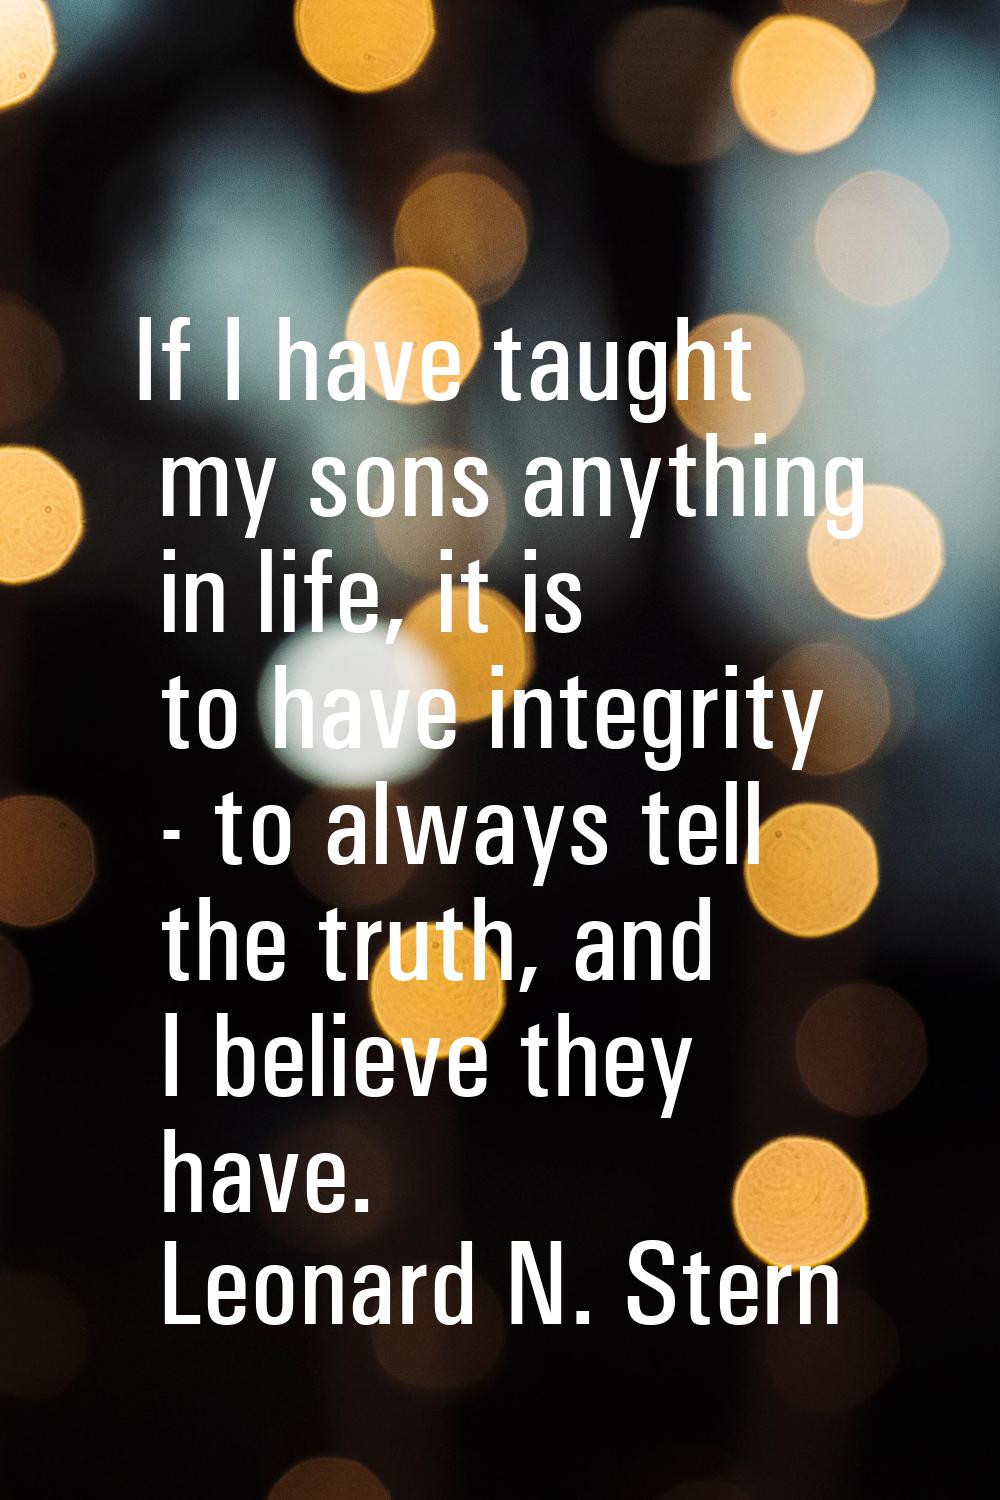 If I have taught my sons anything in life, it is to have integrity - to always tell the truth, and 